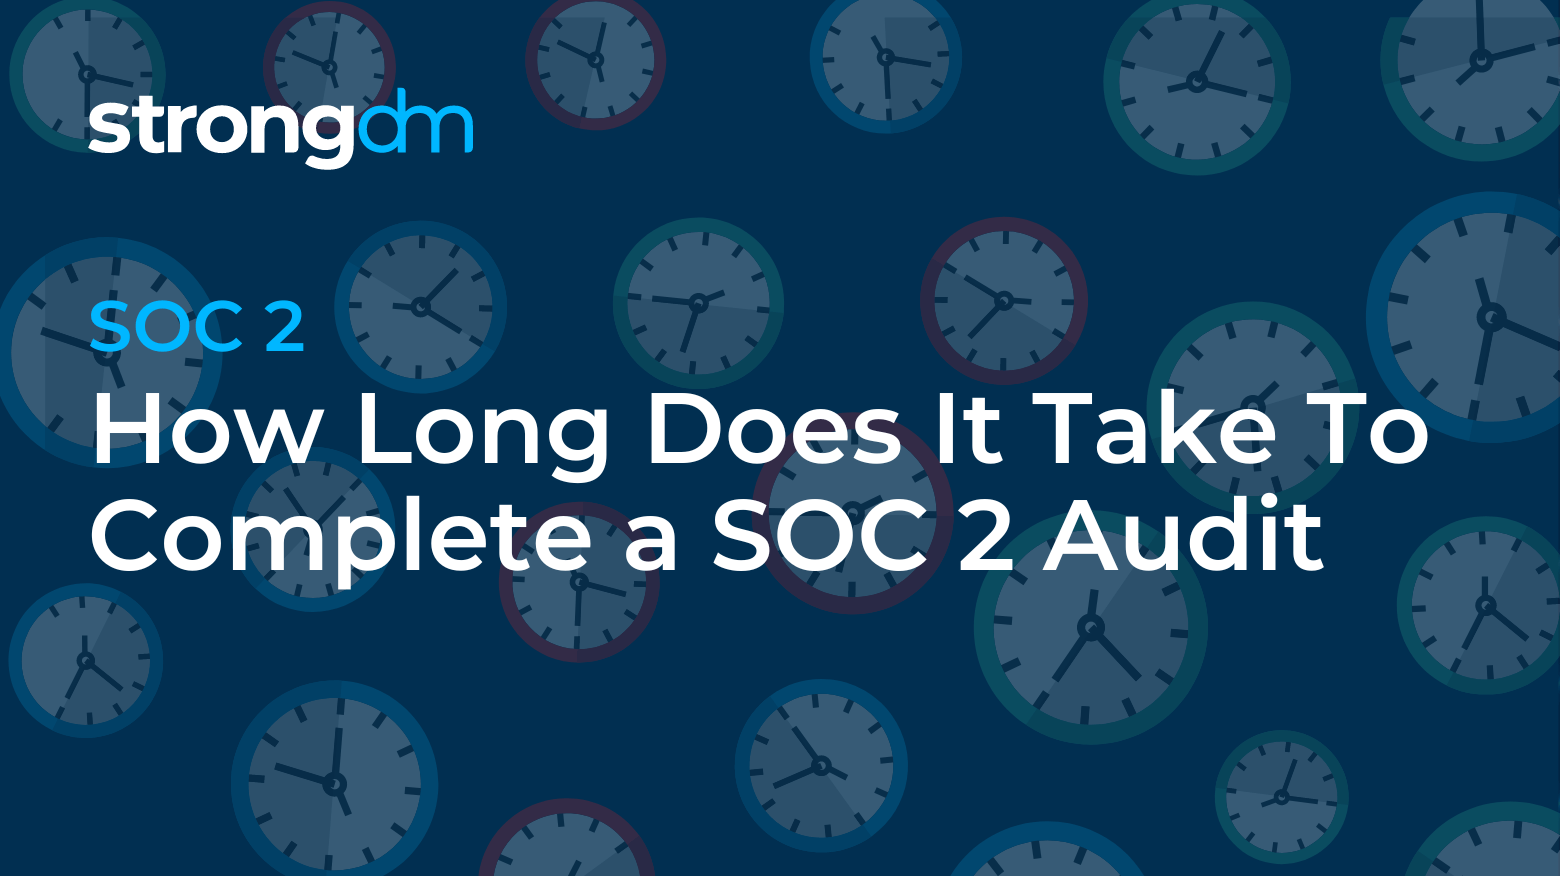 How Long Does It Take To Complete a SOC 2 Audit